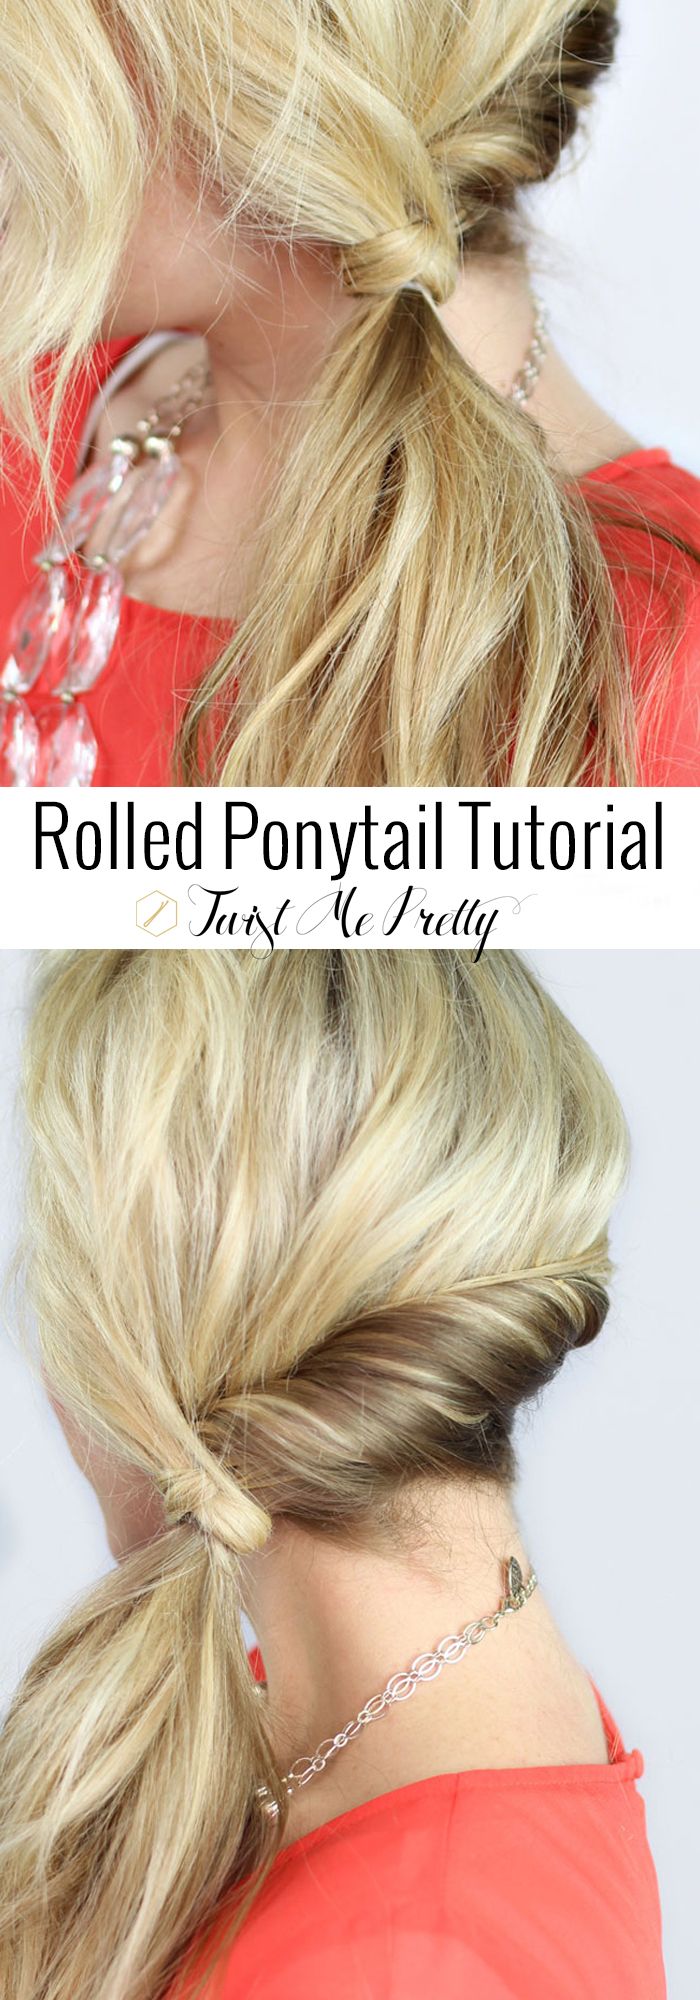 16 Fabulous Side Ponytail Hairstyles Pretty Designs